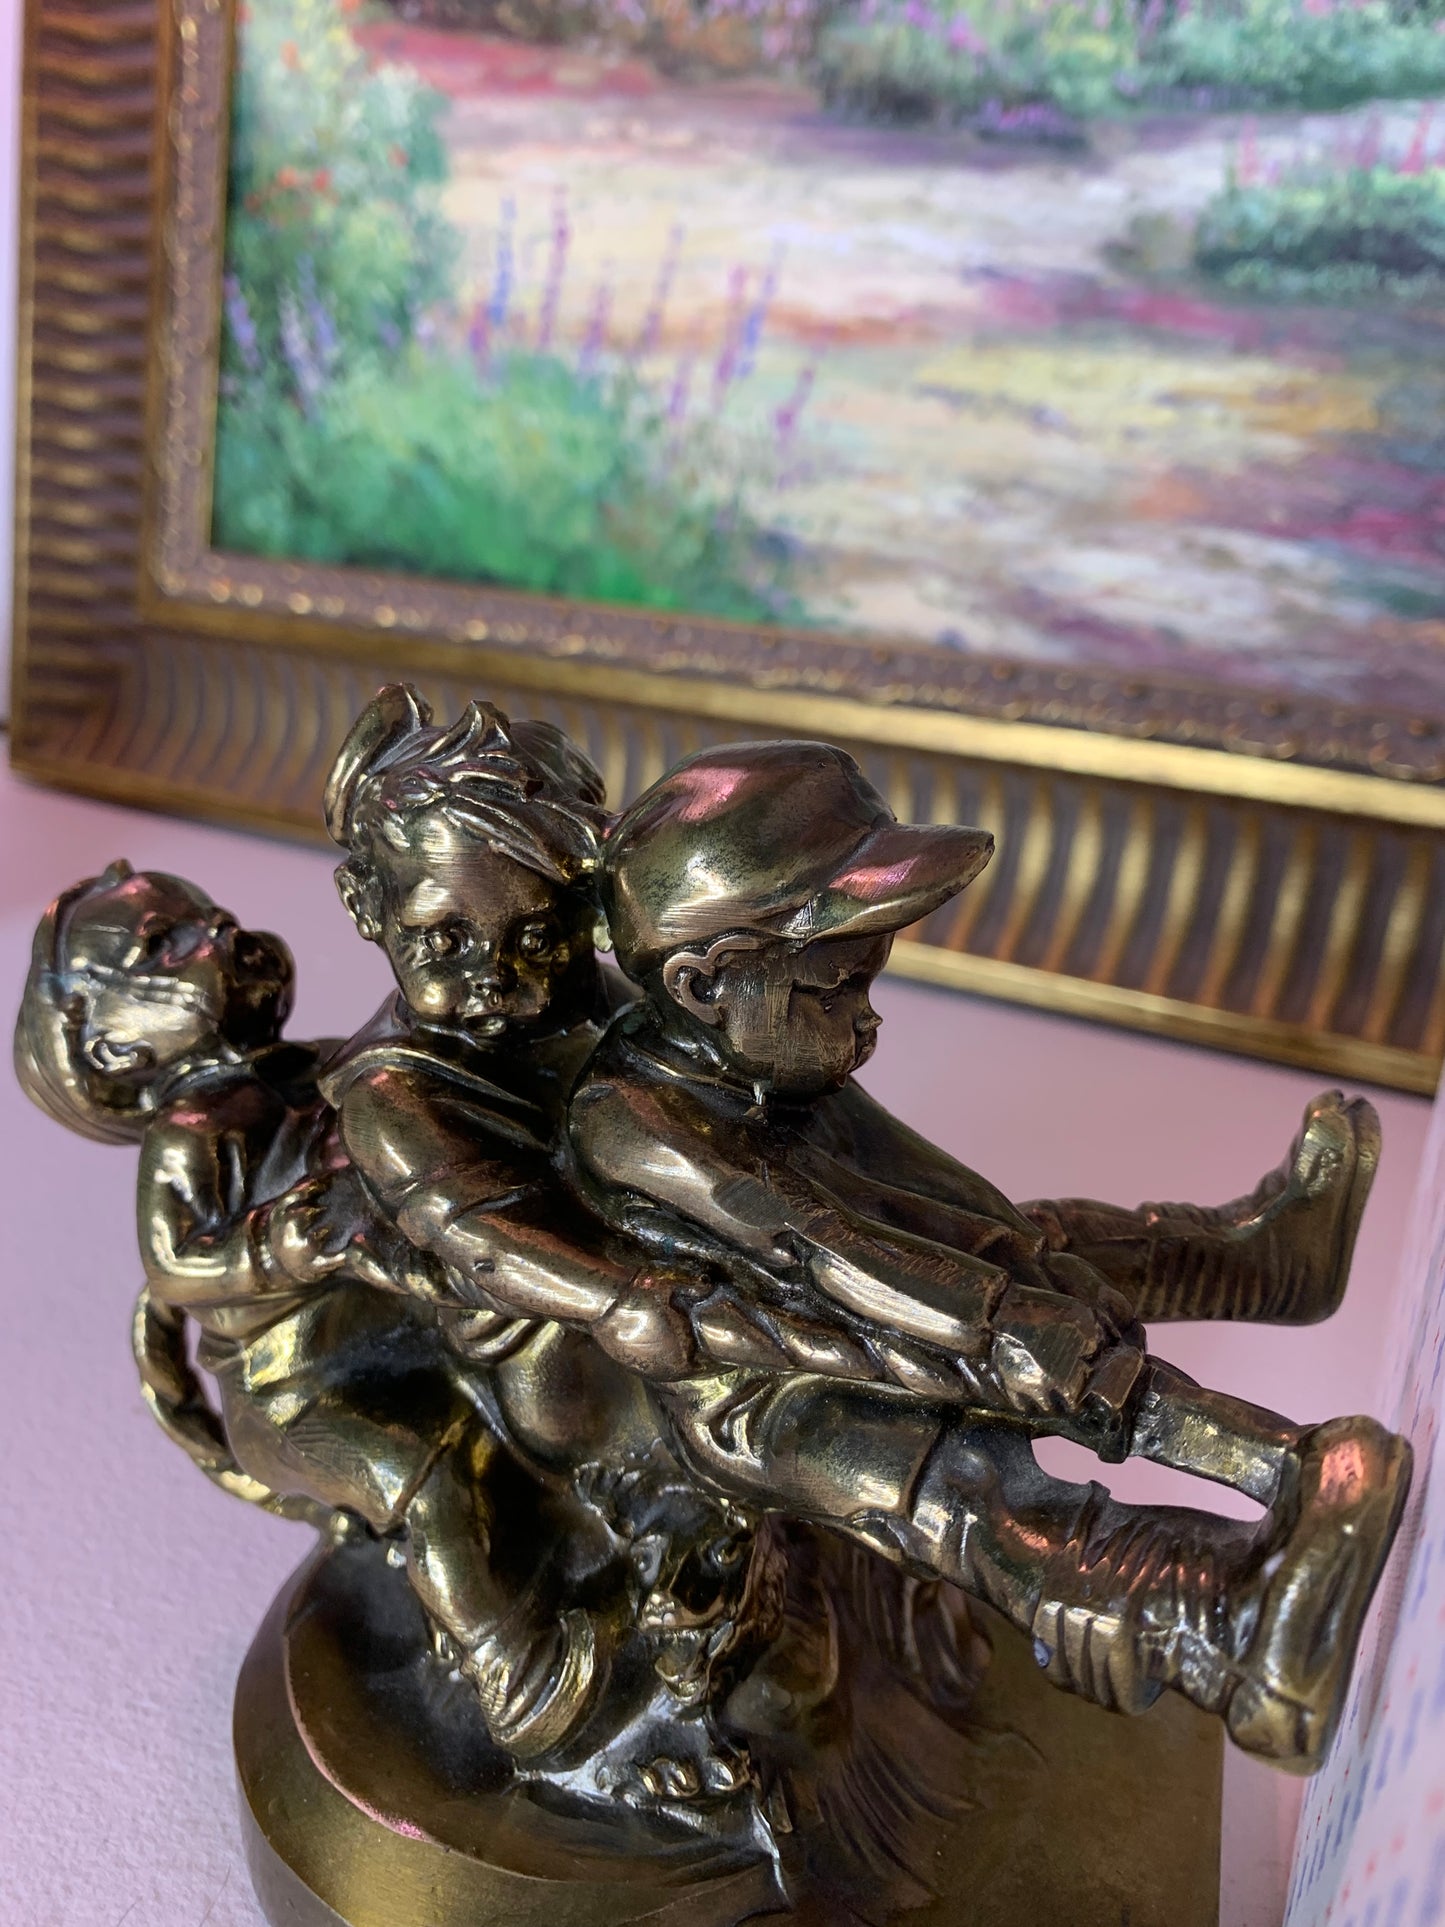 Whimsical Tug Of War Brass Bookend - Excellent condition!